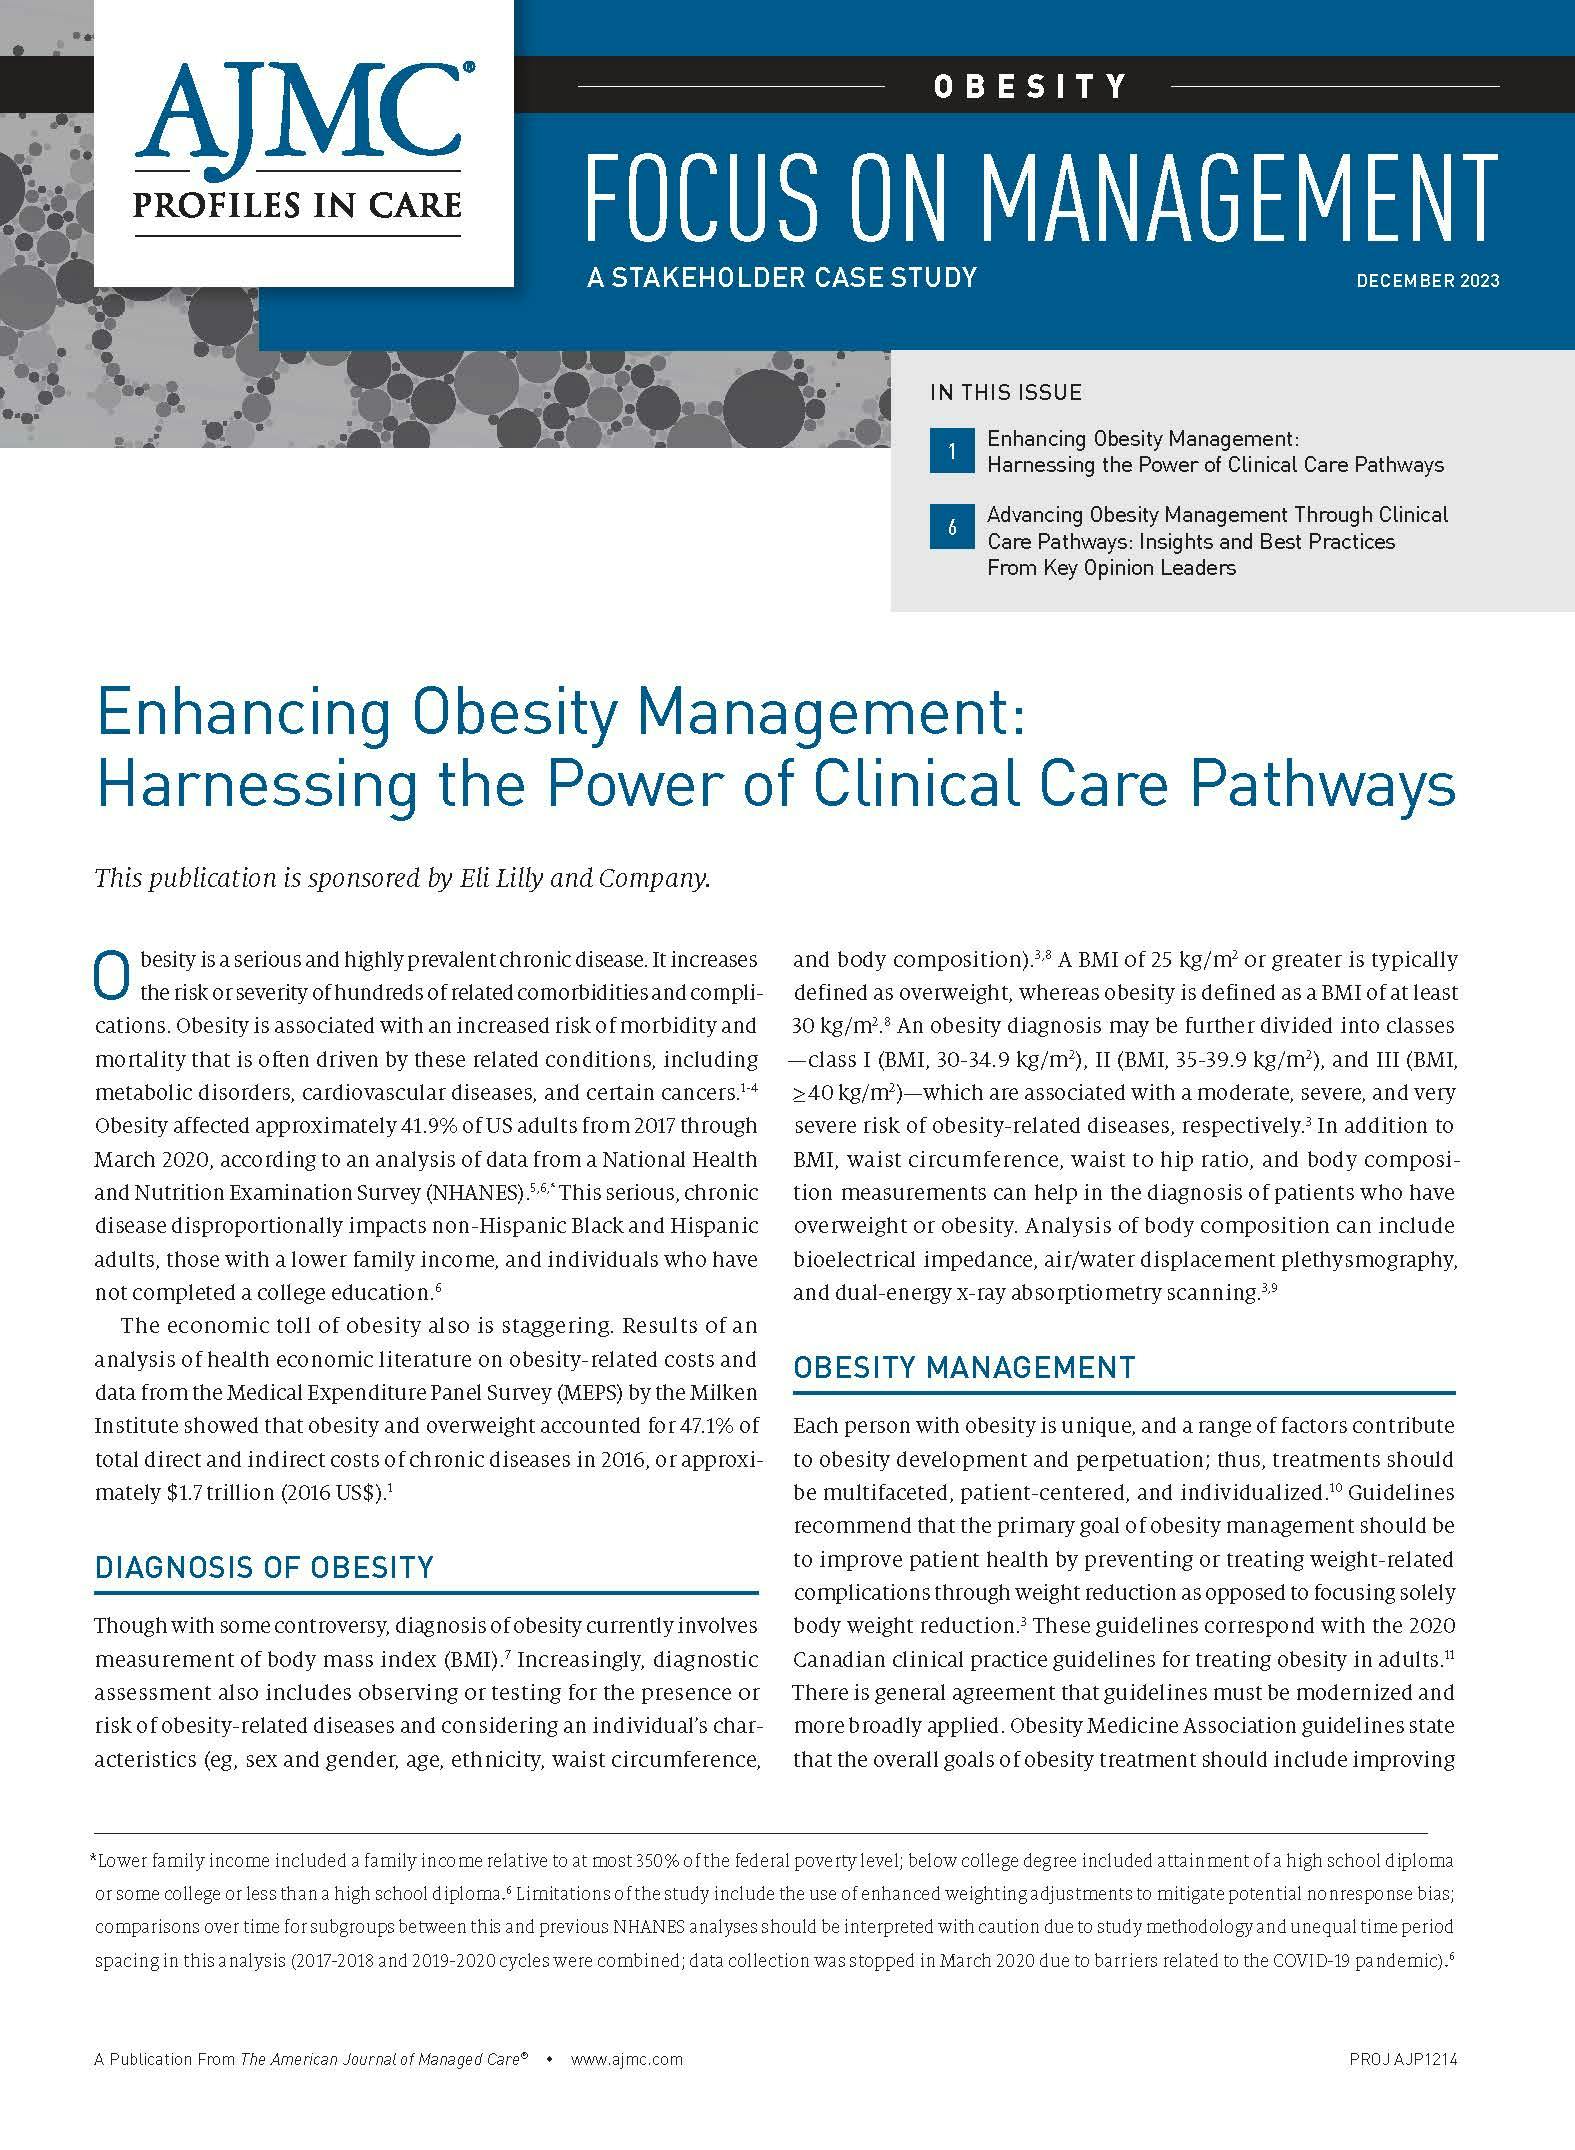 Enhancing Obesity Management: Harnessing the Power of Clinical Care Pathways